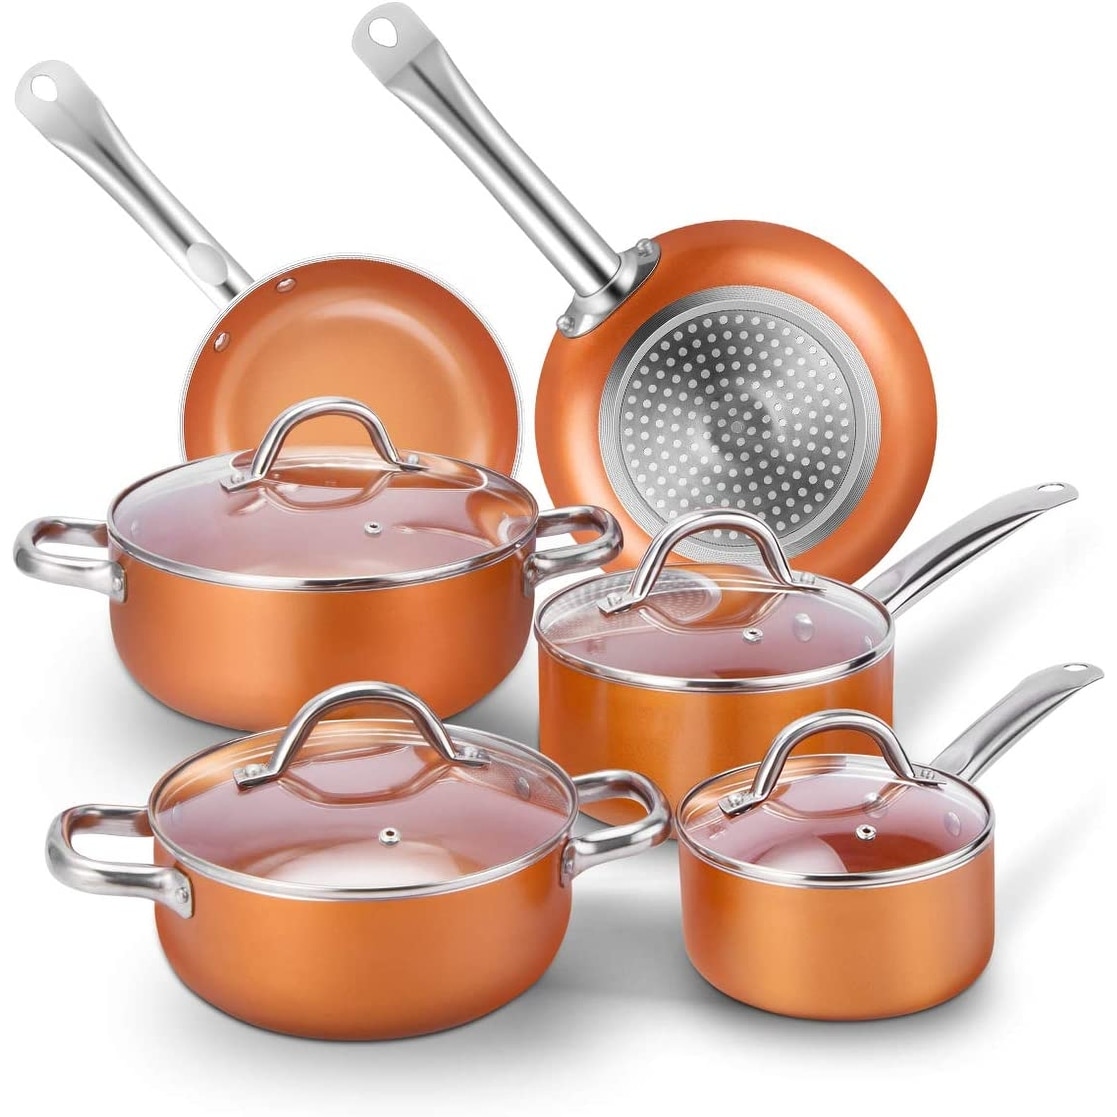 https://ak1.ostkcdn.com/images/products/is/images/direct/b33b67abff0003f23d231d1edcb71eb0578fc4d1/Copper-Pots-and-Pans-Set-Nonstick-10-Piece-Ceramic-Cookware-Set%2C-Stainless-Steel-Handles.jpg